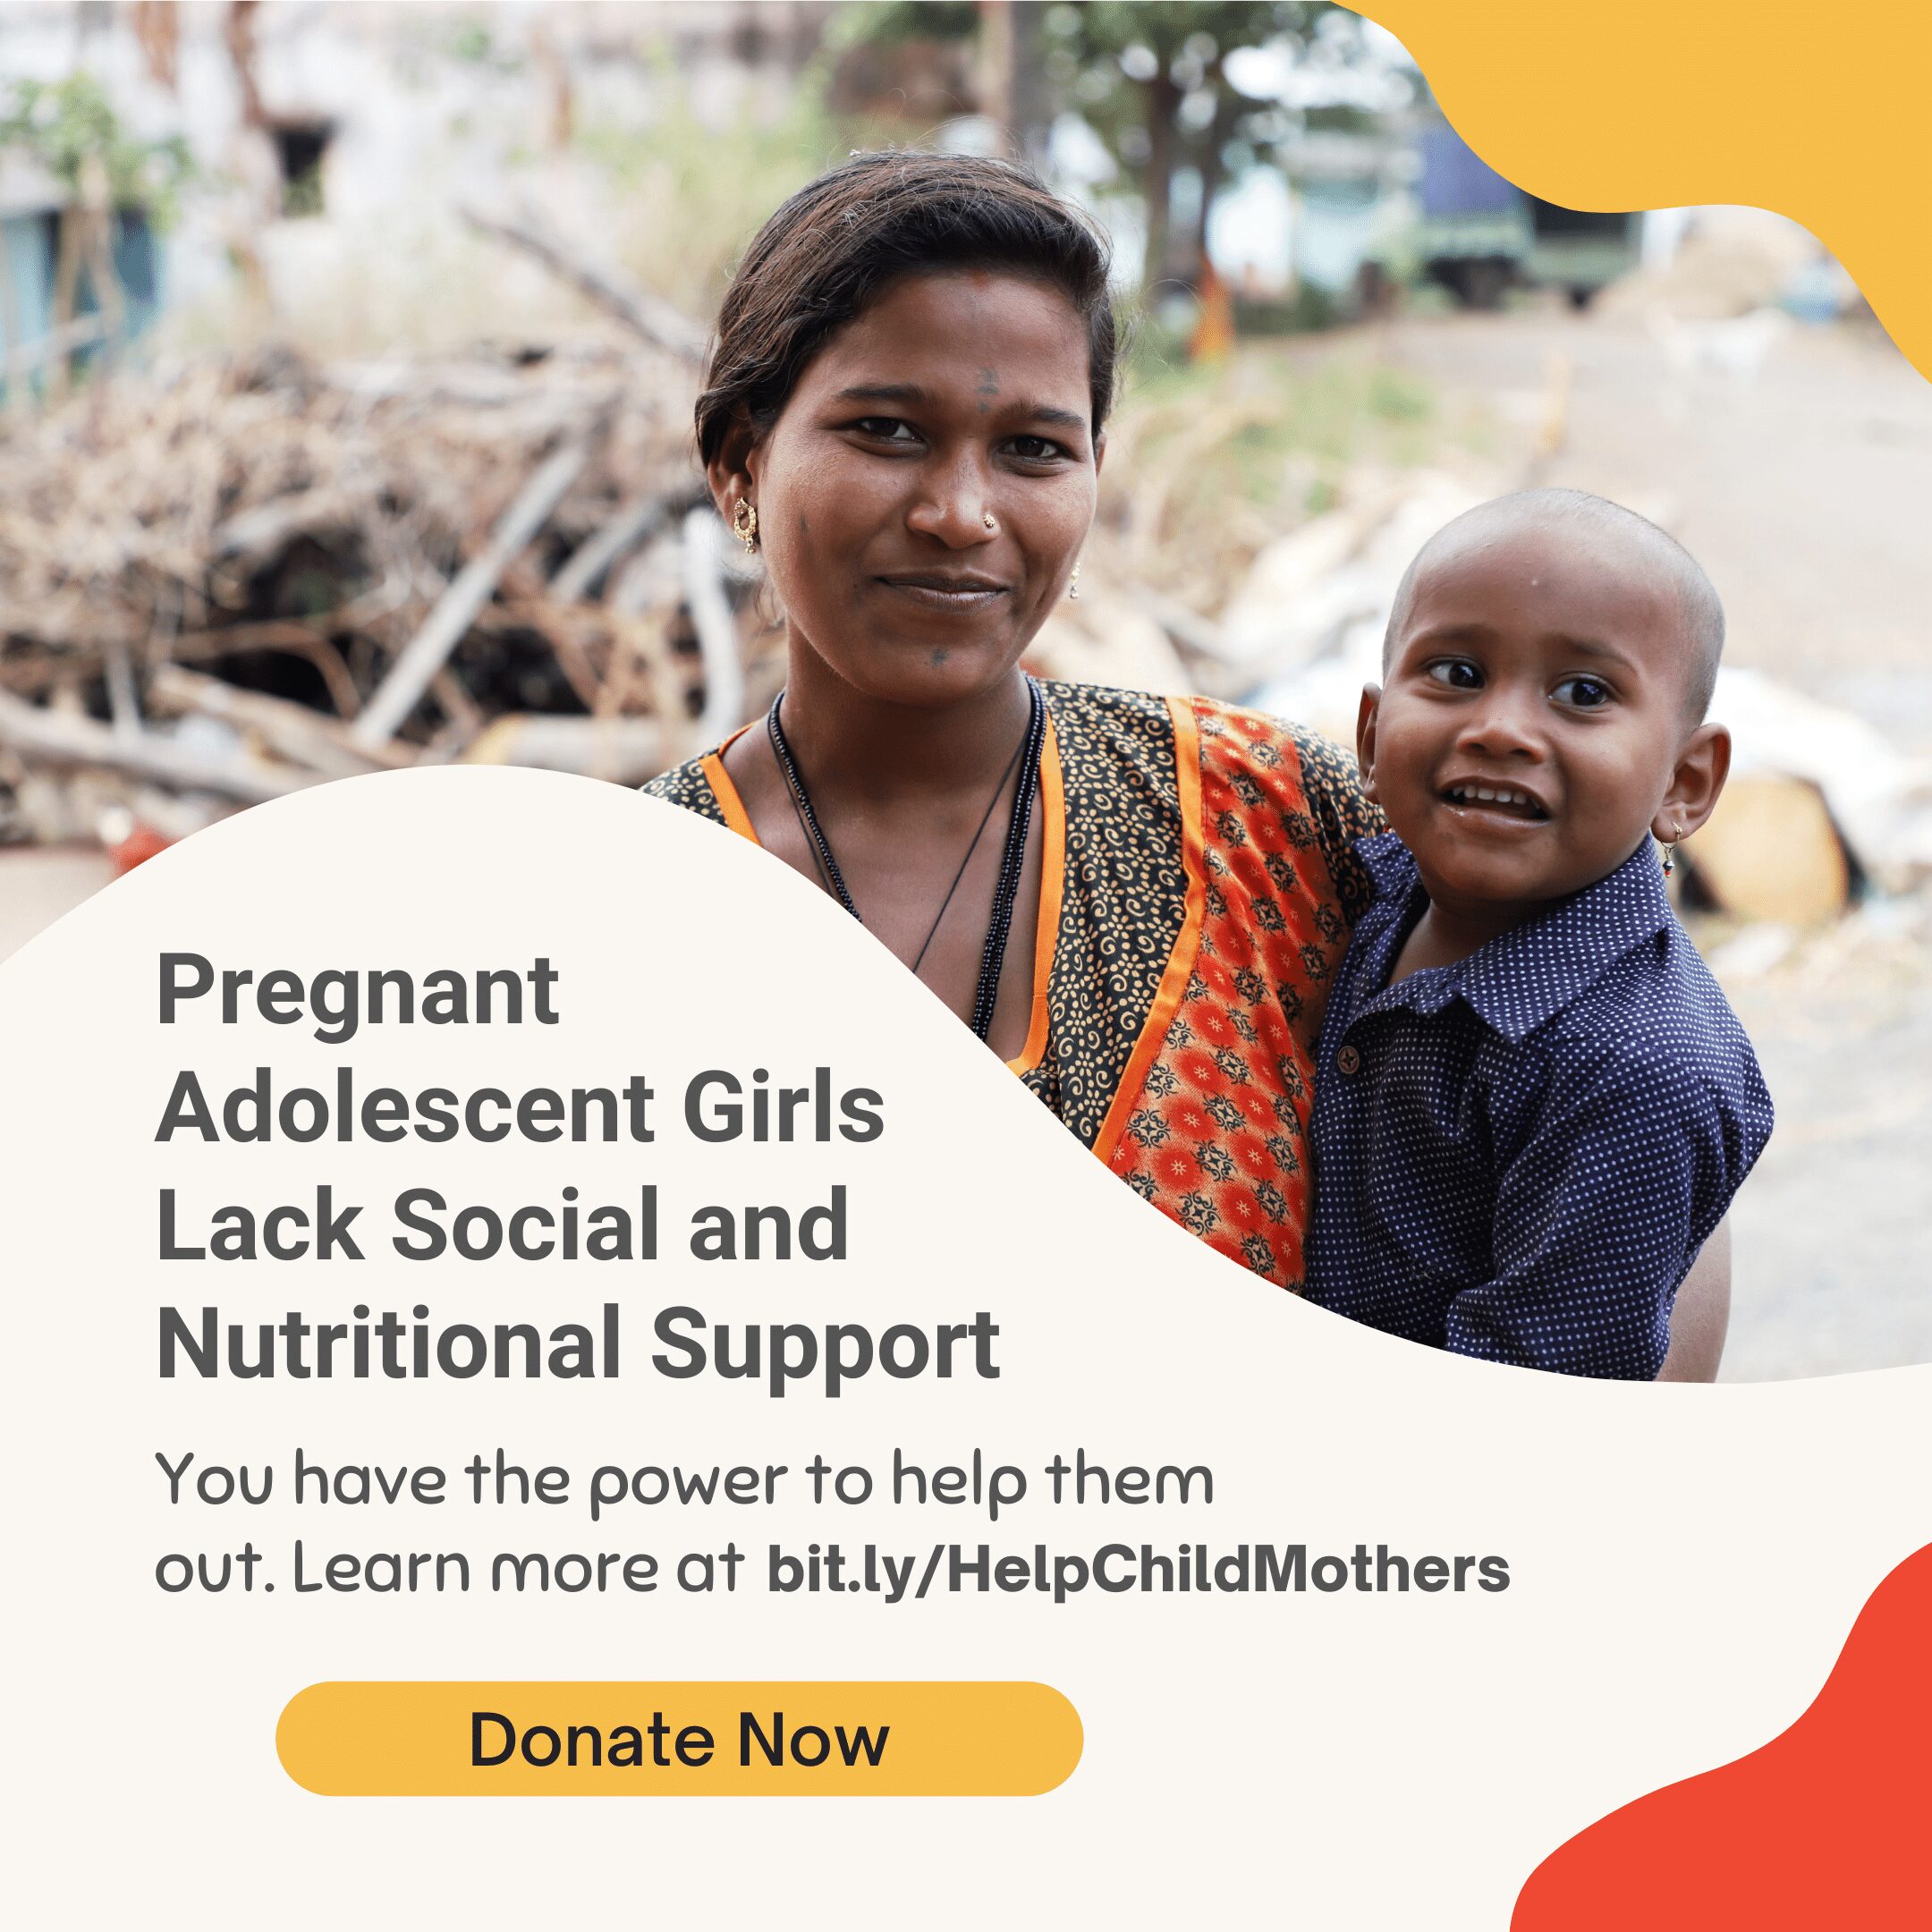 smiling mother and child. copy encouraging donation to support child mothers